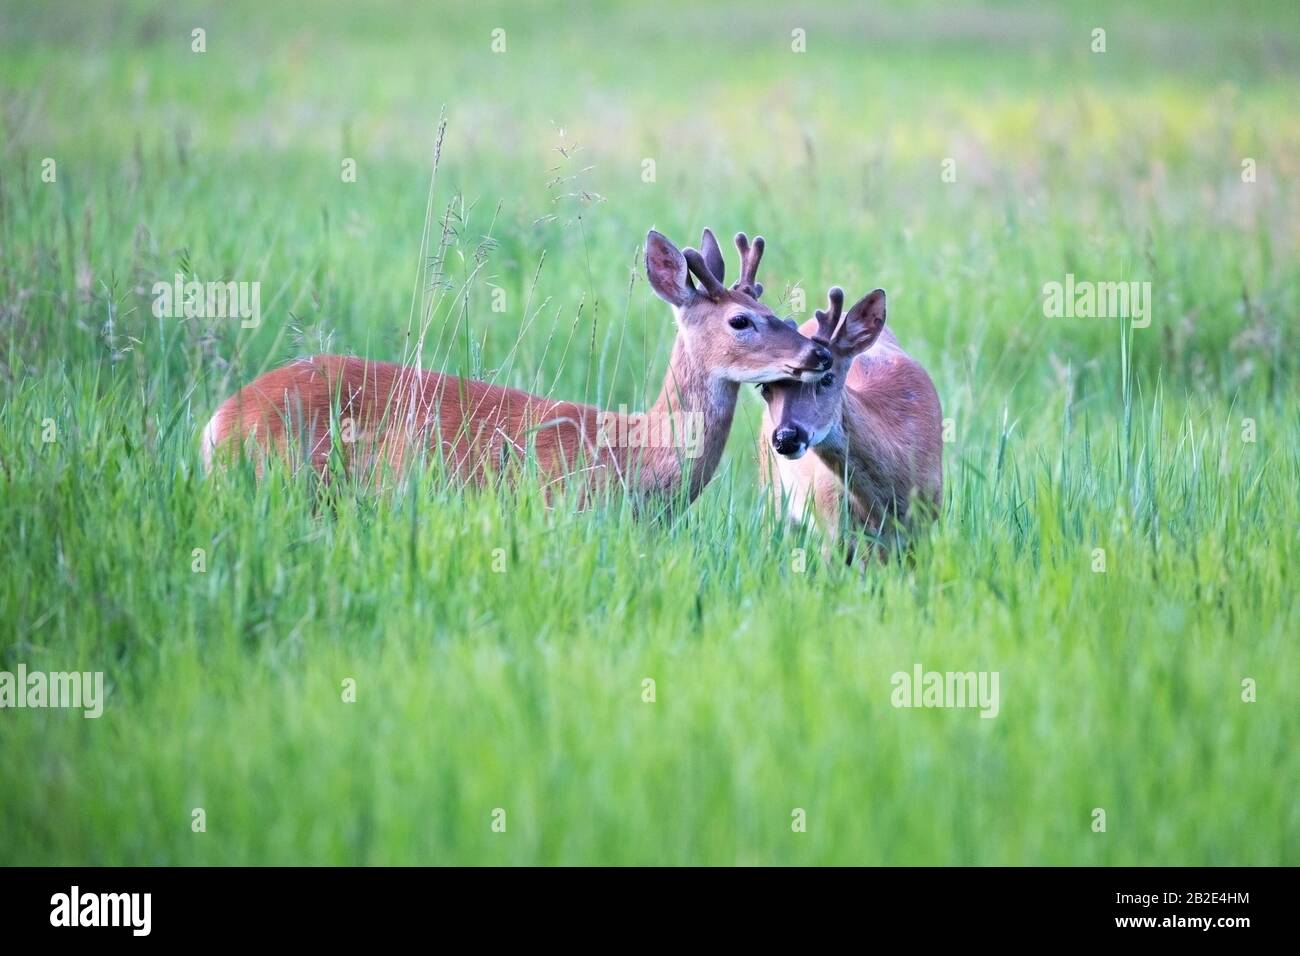 Young white-tailed deer bucks (Odocoileus virginianus) with velvet antlers rubbing heads together in a grassy meadow, Canada Stock Photo